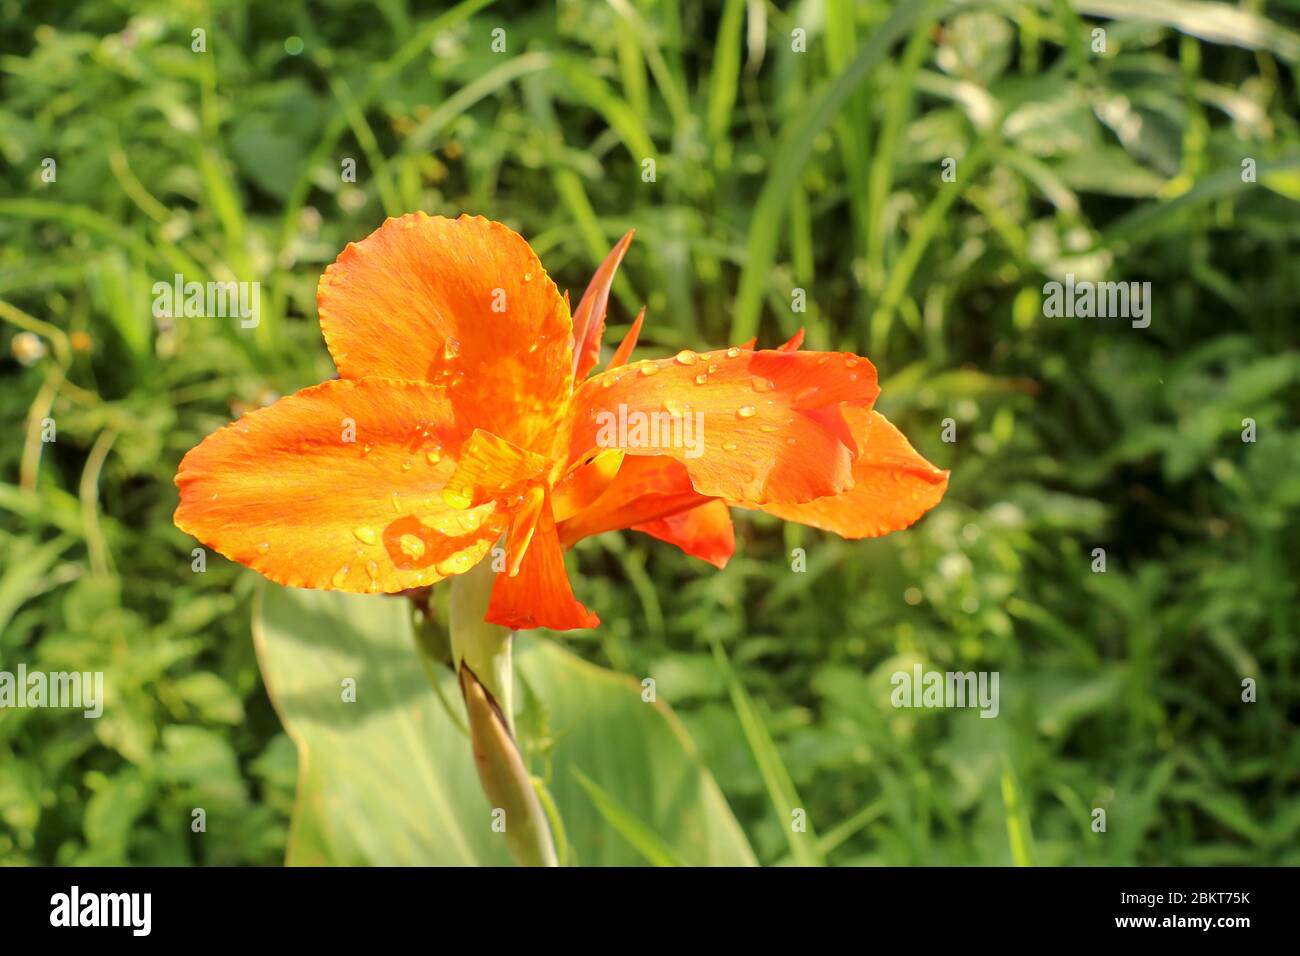 Close Up Of Blossoming Flowers Canna With Buds And Leaves Growing Indian Shot In Orange At The Garden Bautiful African Arrowroot In Orange Color De Stock Photo Alamy